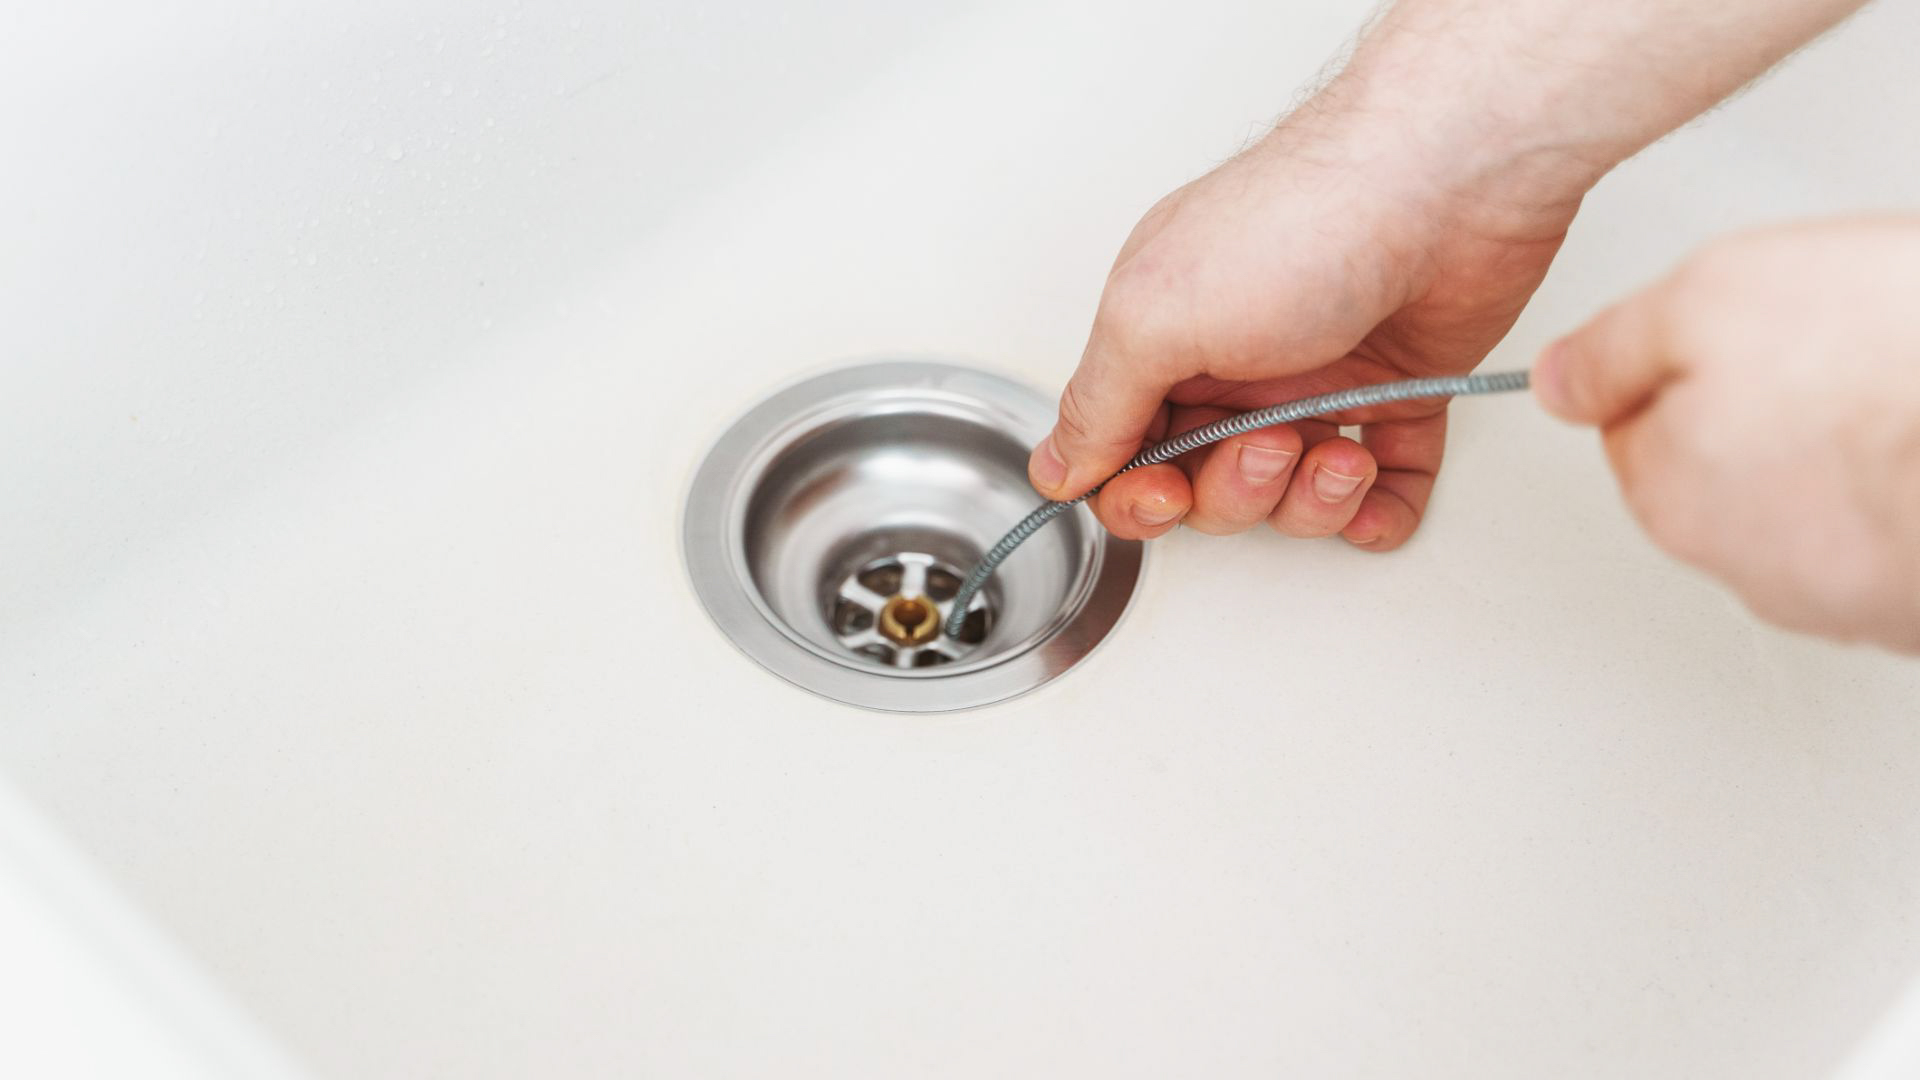 Sewer & Drain Cleaning in Golden, CO from Fix-it 24/7 Plumbing, Heating, Air & Electric